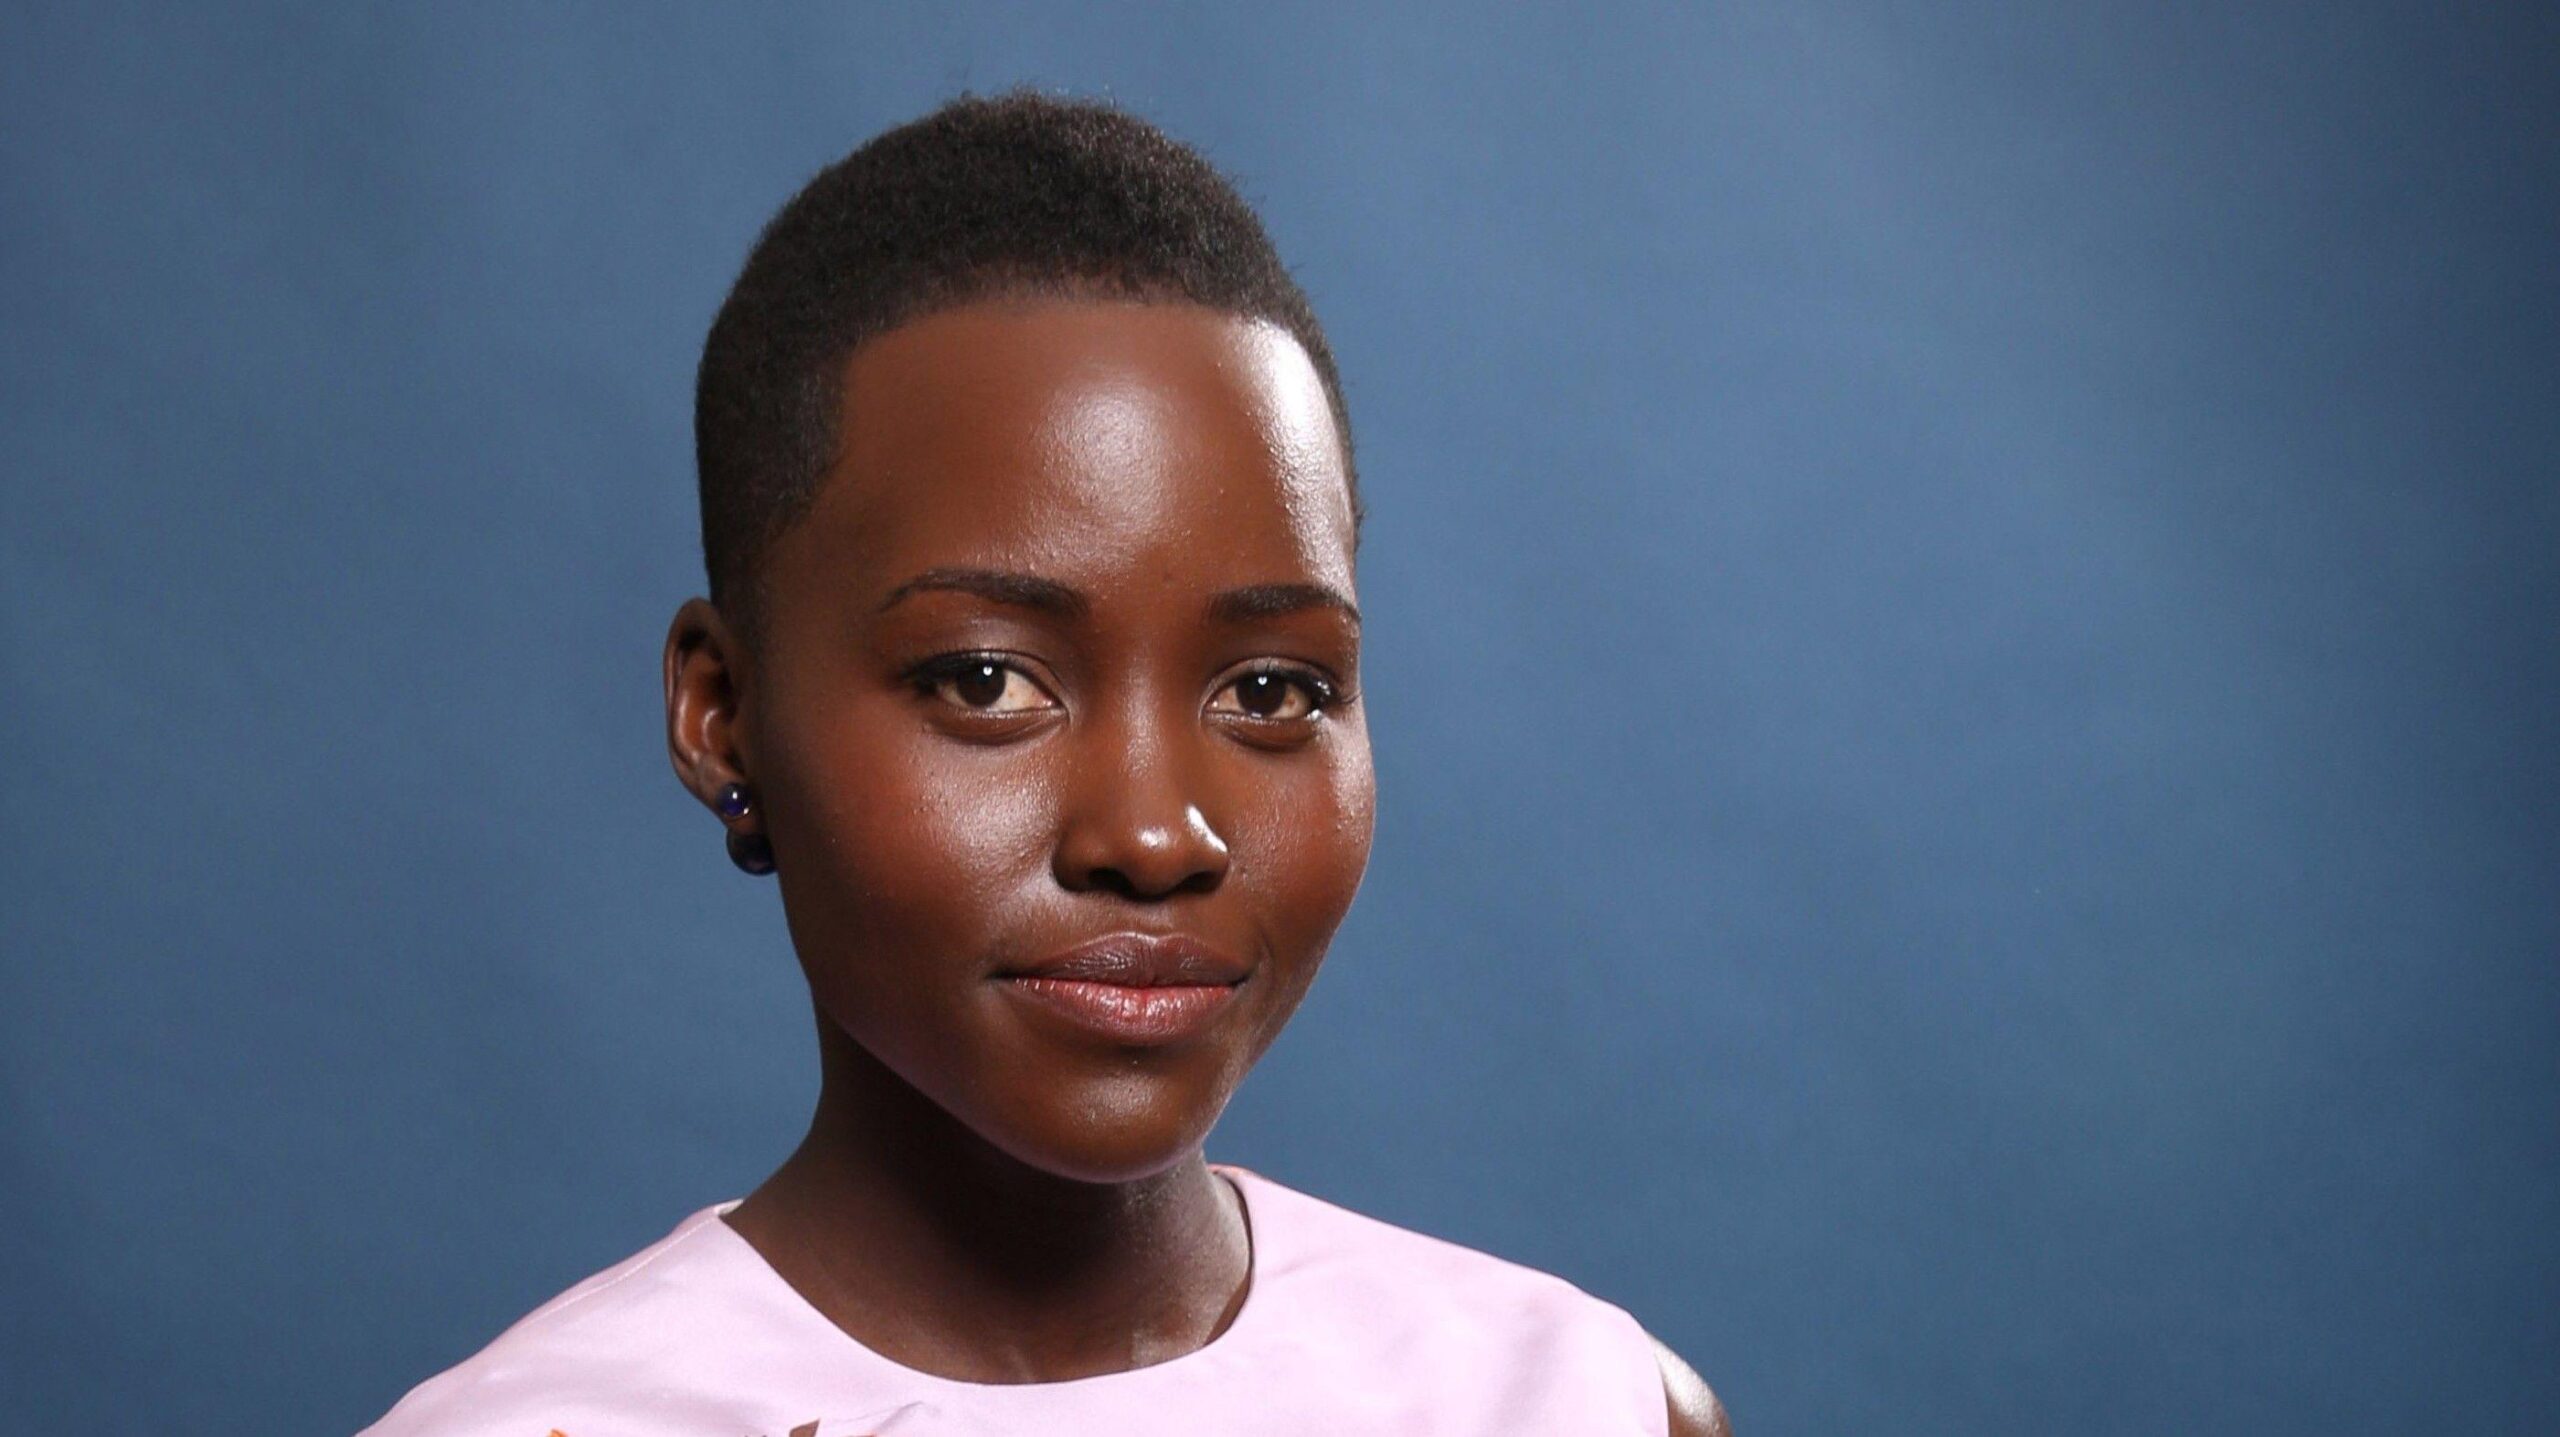 Lupita Nyong'o HD Wallpapers for desktop download in High Quality